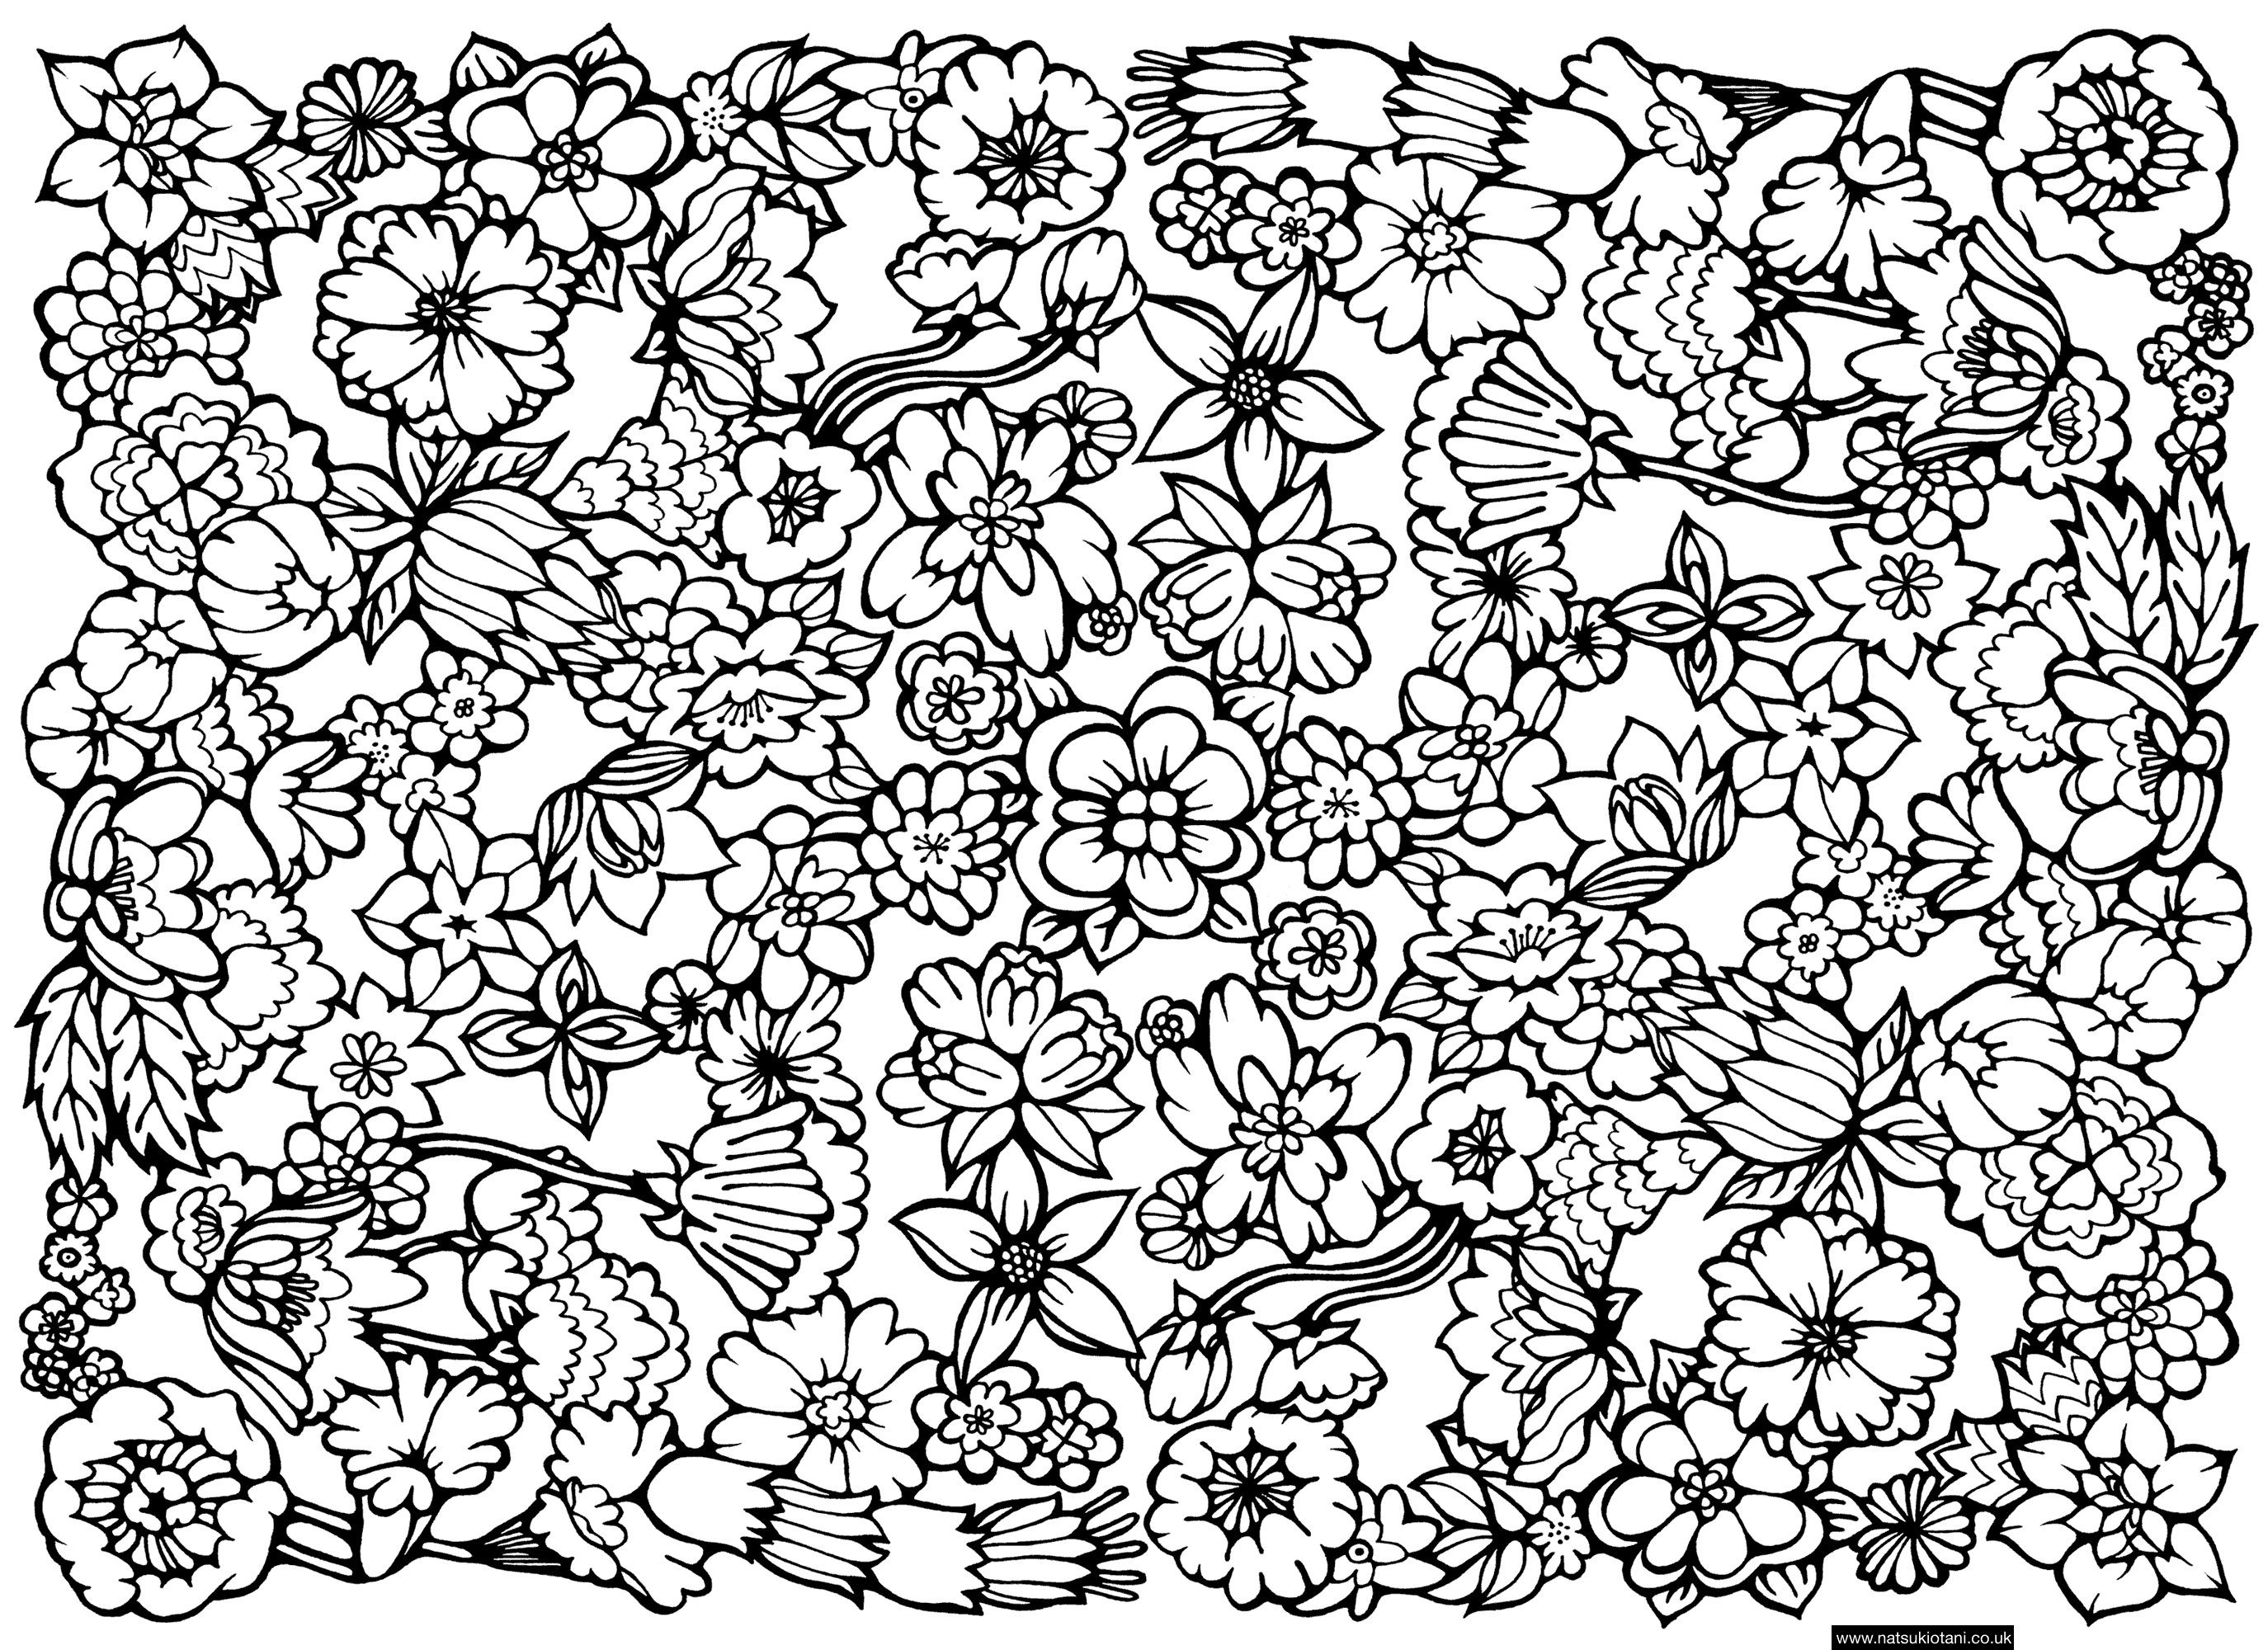 colouring pattern pattern coloring pages best coloring pages for kids colouring pattern 